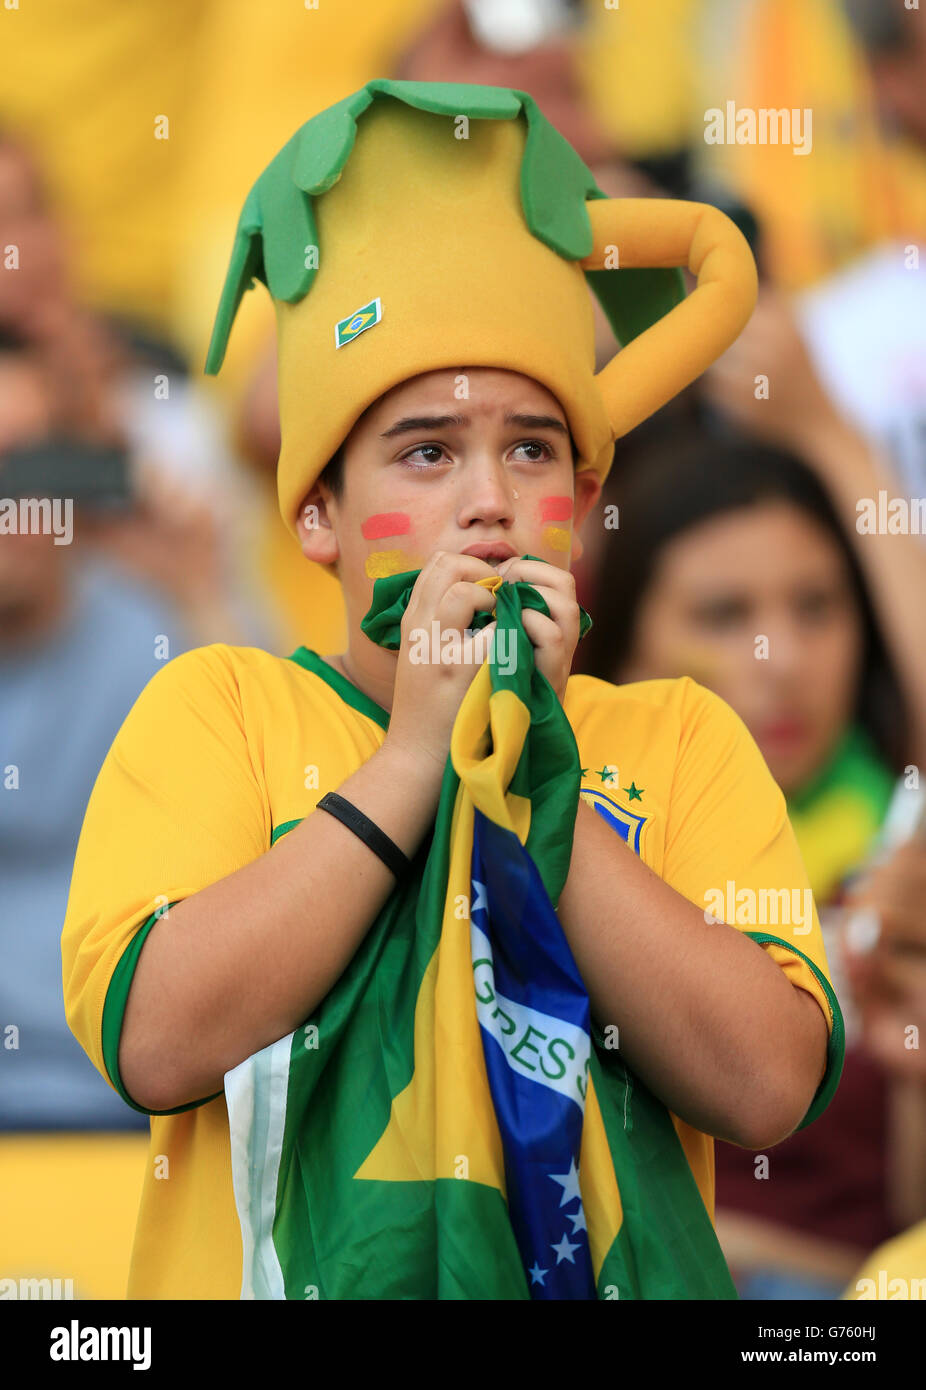 A Brazil fan reacts during his team's penalty shoot-out victory against Chile before the FIFA World Cup, Round of 16 match between Uruguay and Colombia at the Estadio do Maracana, Rio de Janeiro, Brazil. PRESS ASSOCIATION Photo. Picture date: Saturday June 28, 2014. Photo credit should read: Mike Egerton/PA Wire. RESTRICTIONS: No commercial use. No use with any unofficial 3rd party logos. No manipulation of images. No video emulation Stock Photo